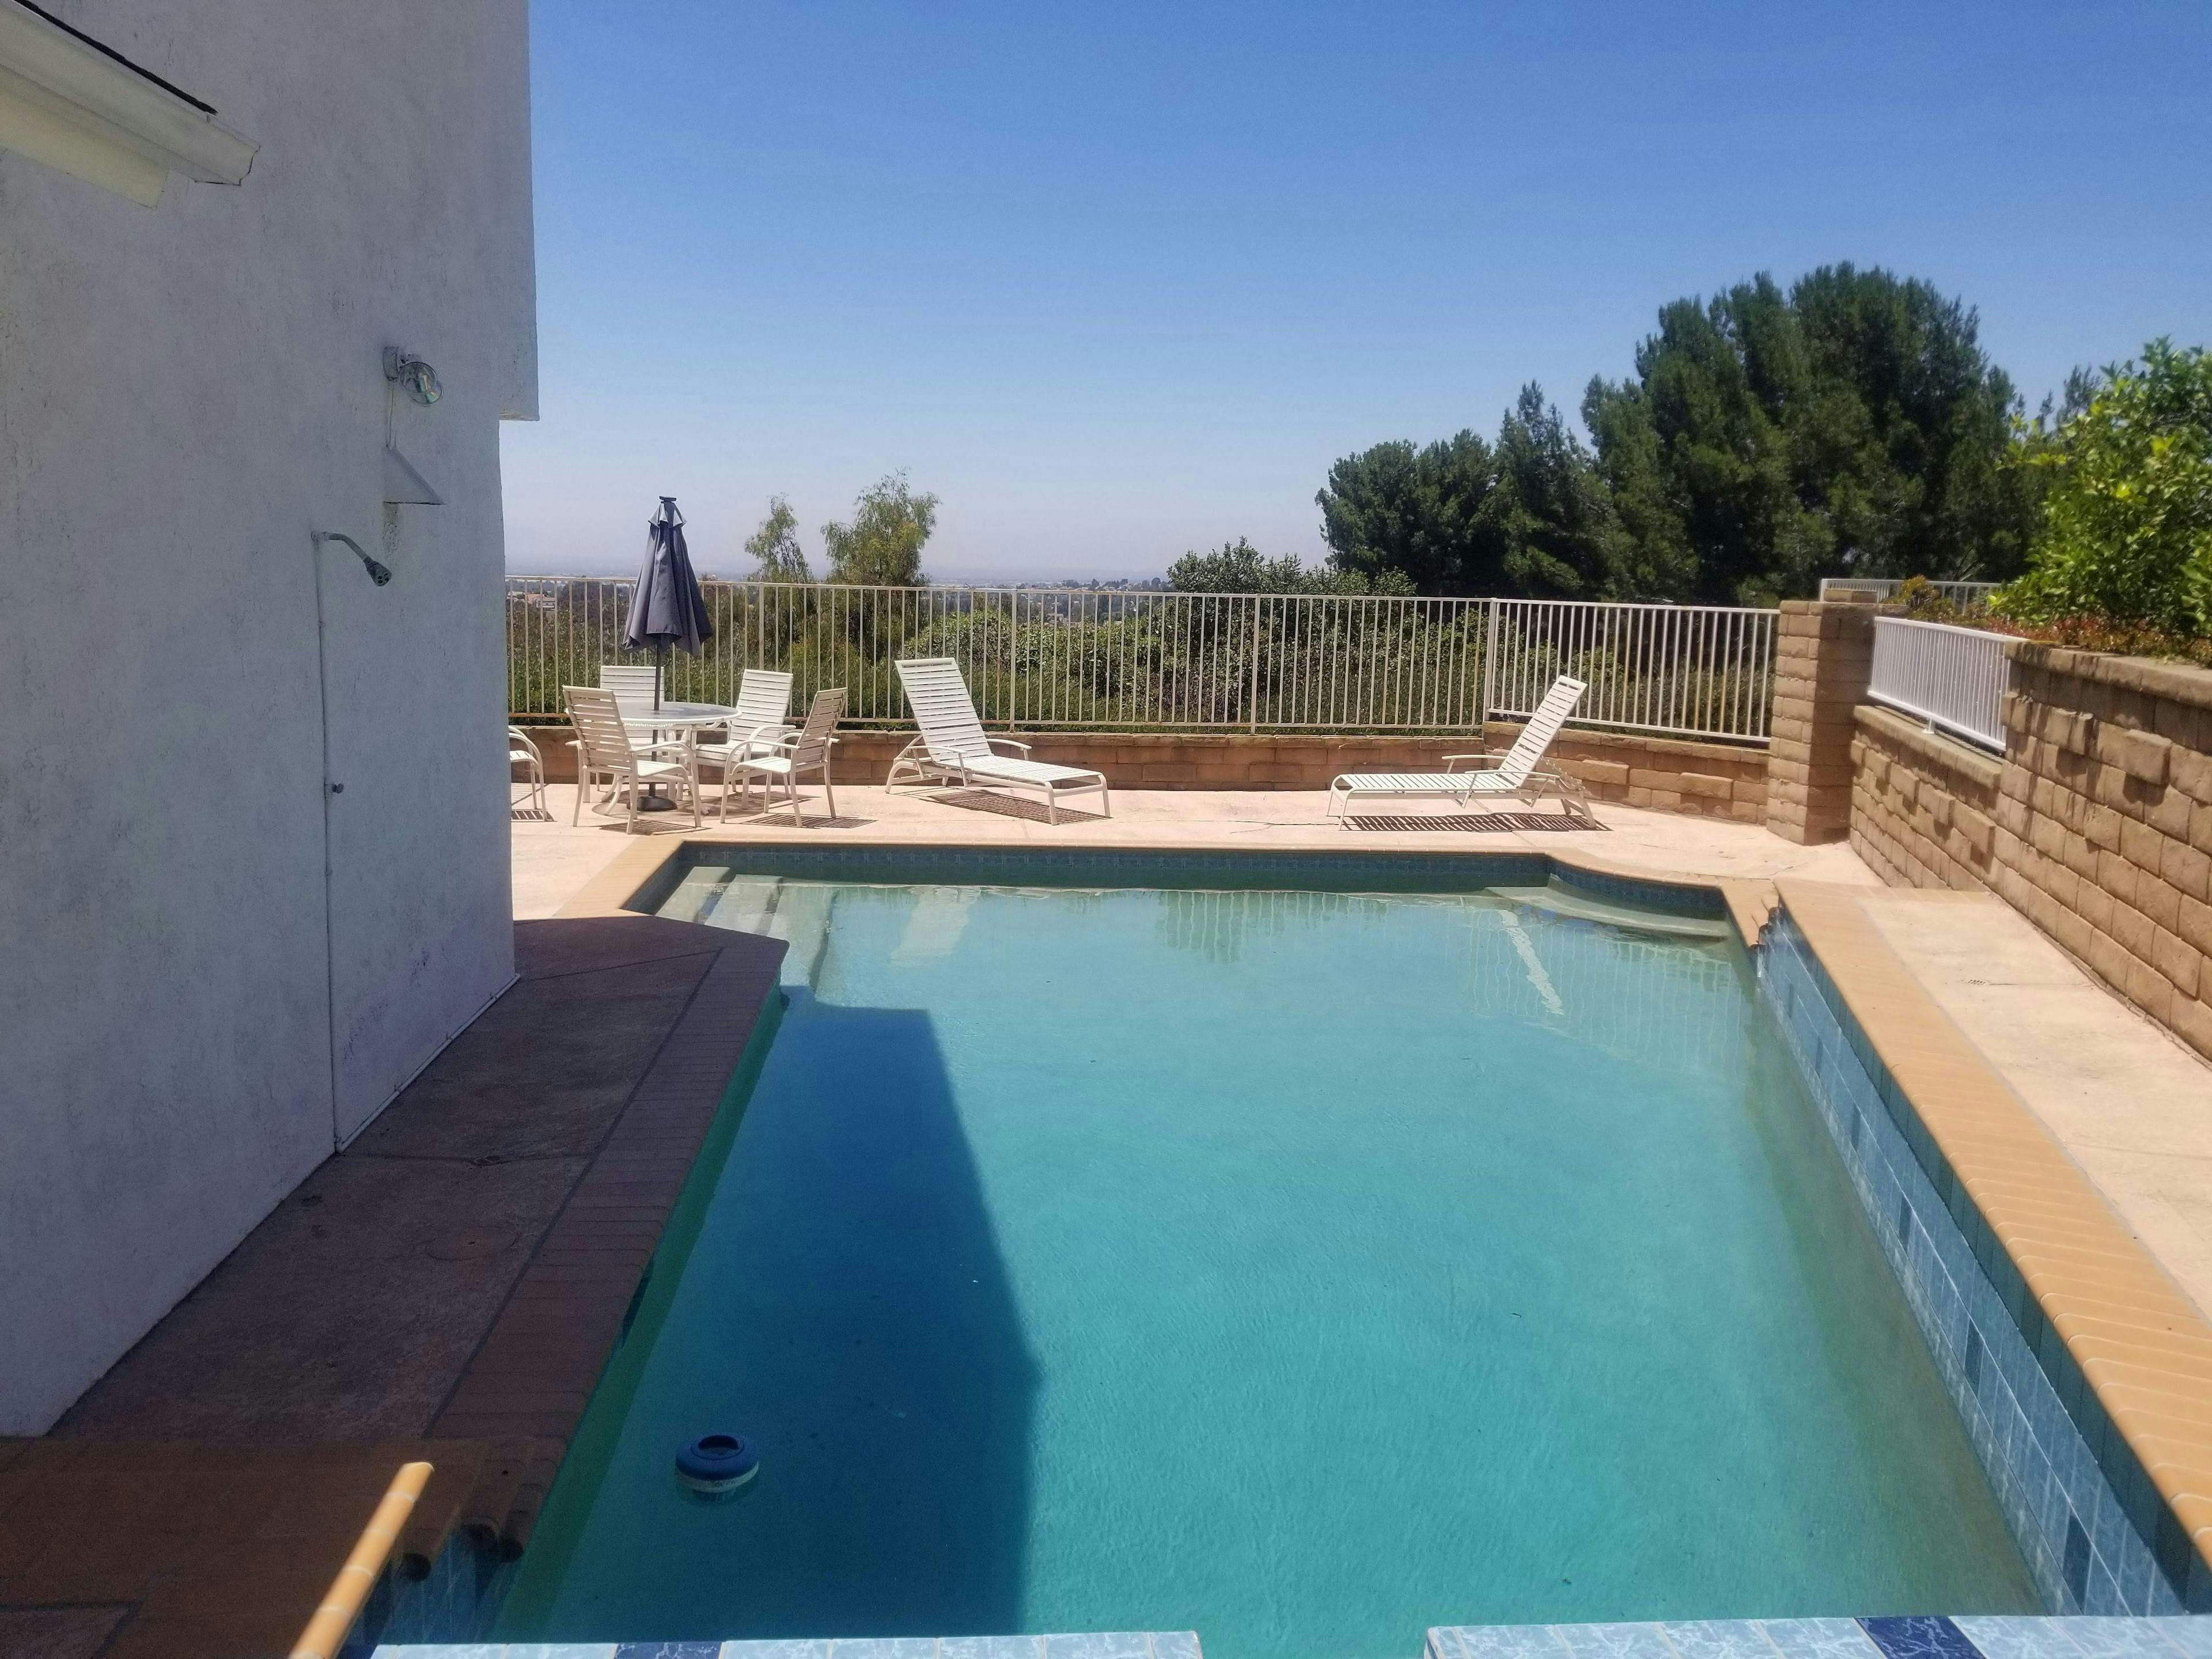 Large pool with beautiful views of mountains and city of Irvine all the way to Los Angeles